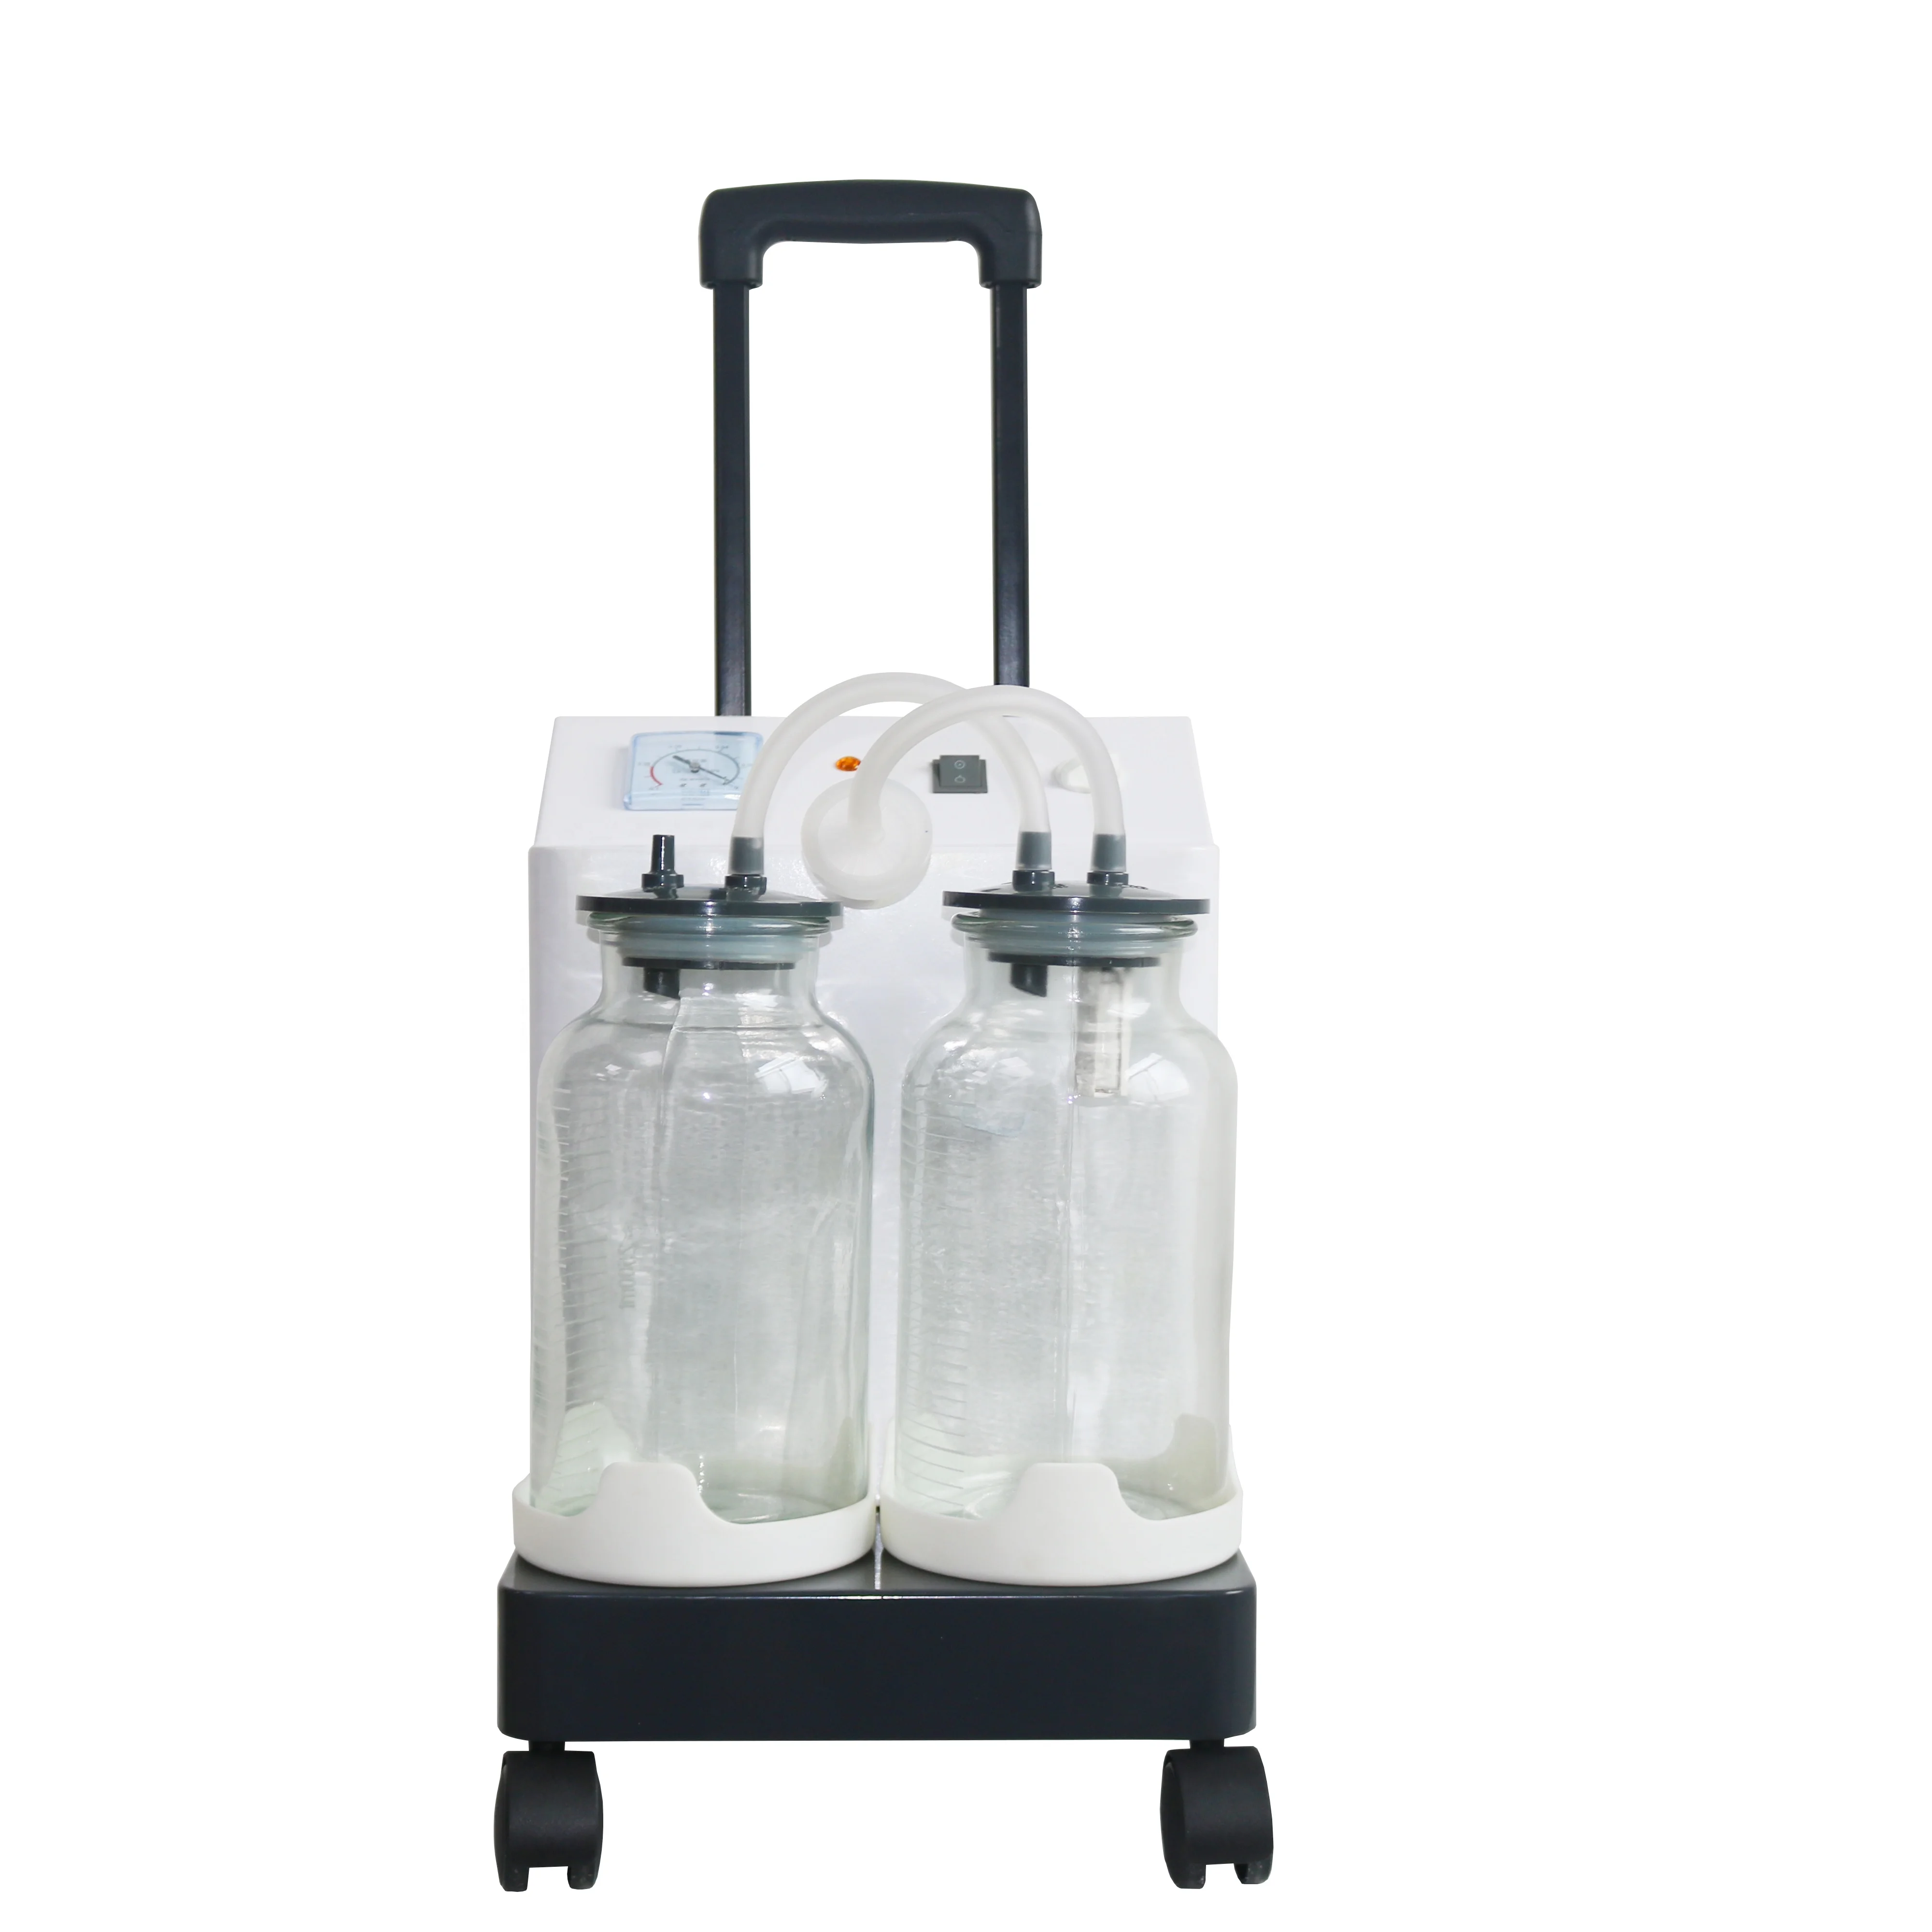 

Cheap Price Portable Surgical Medical Equipment High Flow 2500ml 2 bottle Electric Suction Machine